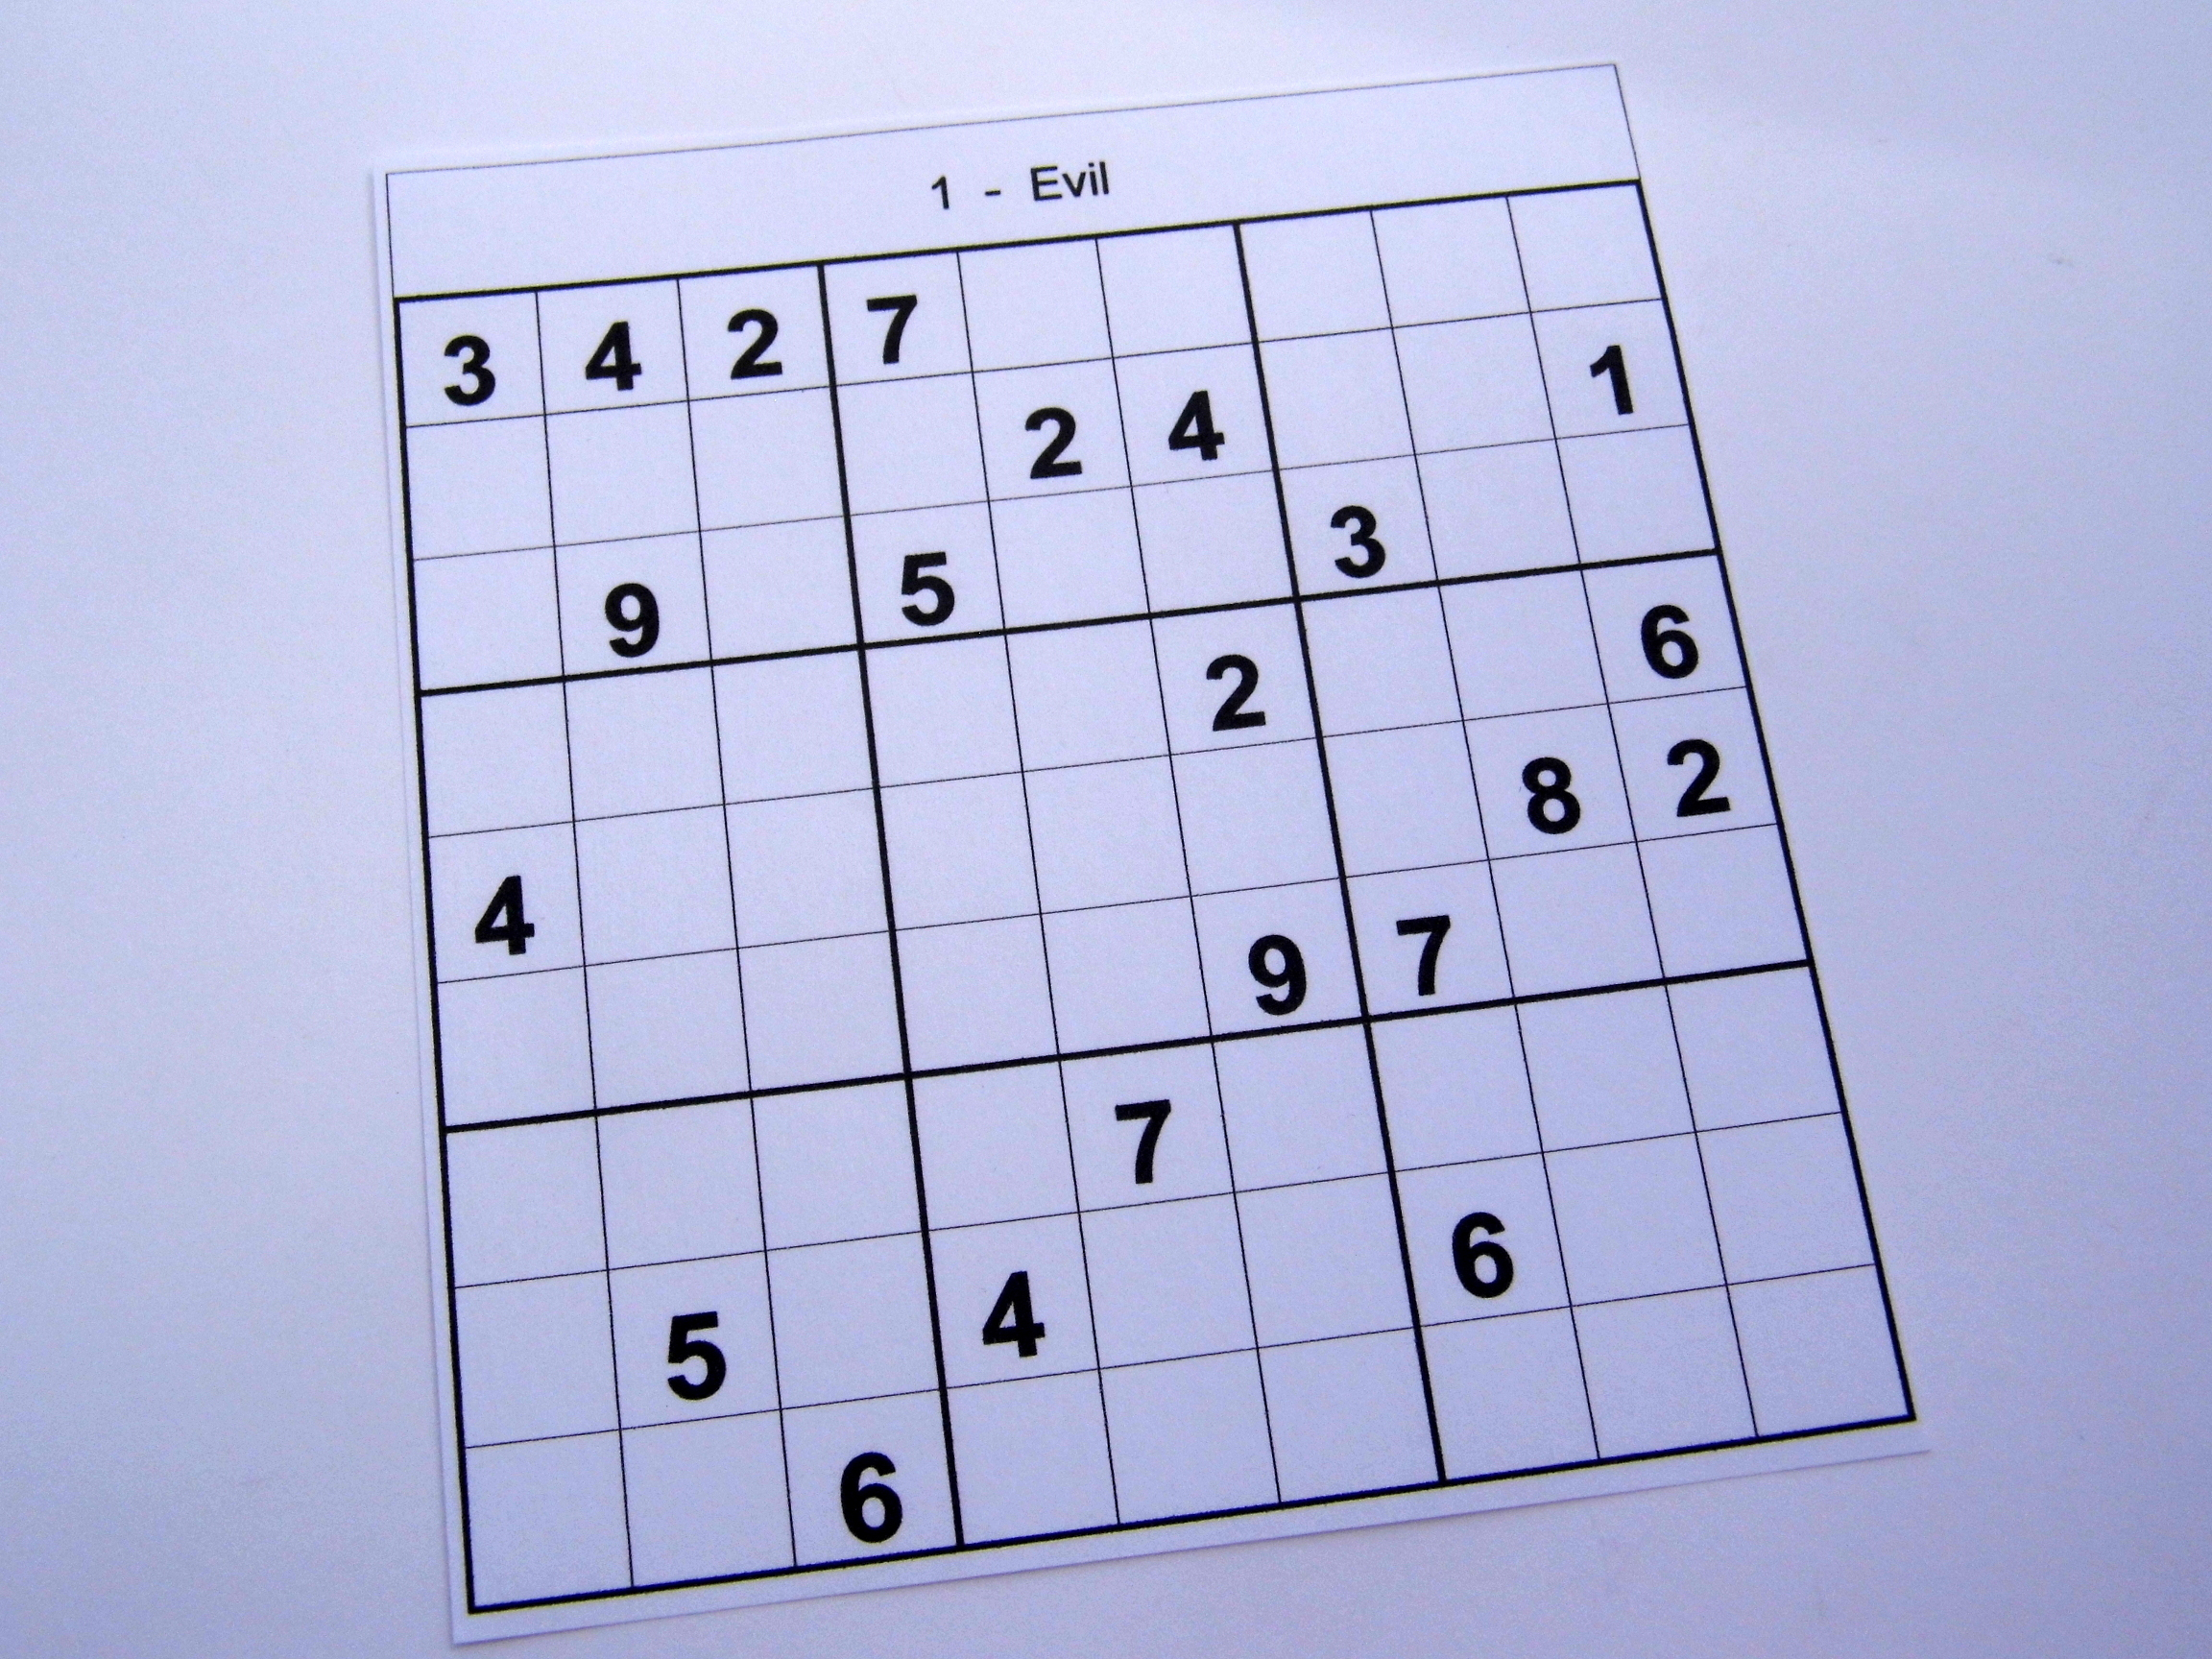 Archive Puzzles – 20 Hard Sudoku Puzzles – Books 1 To 10